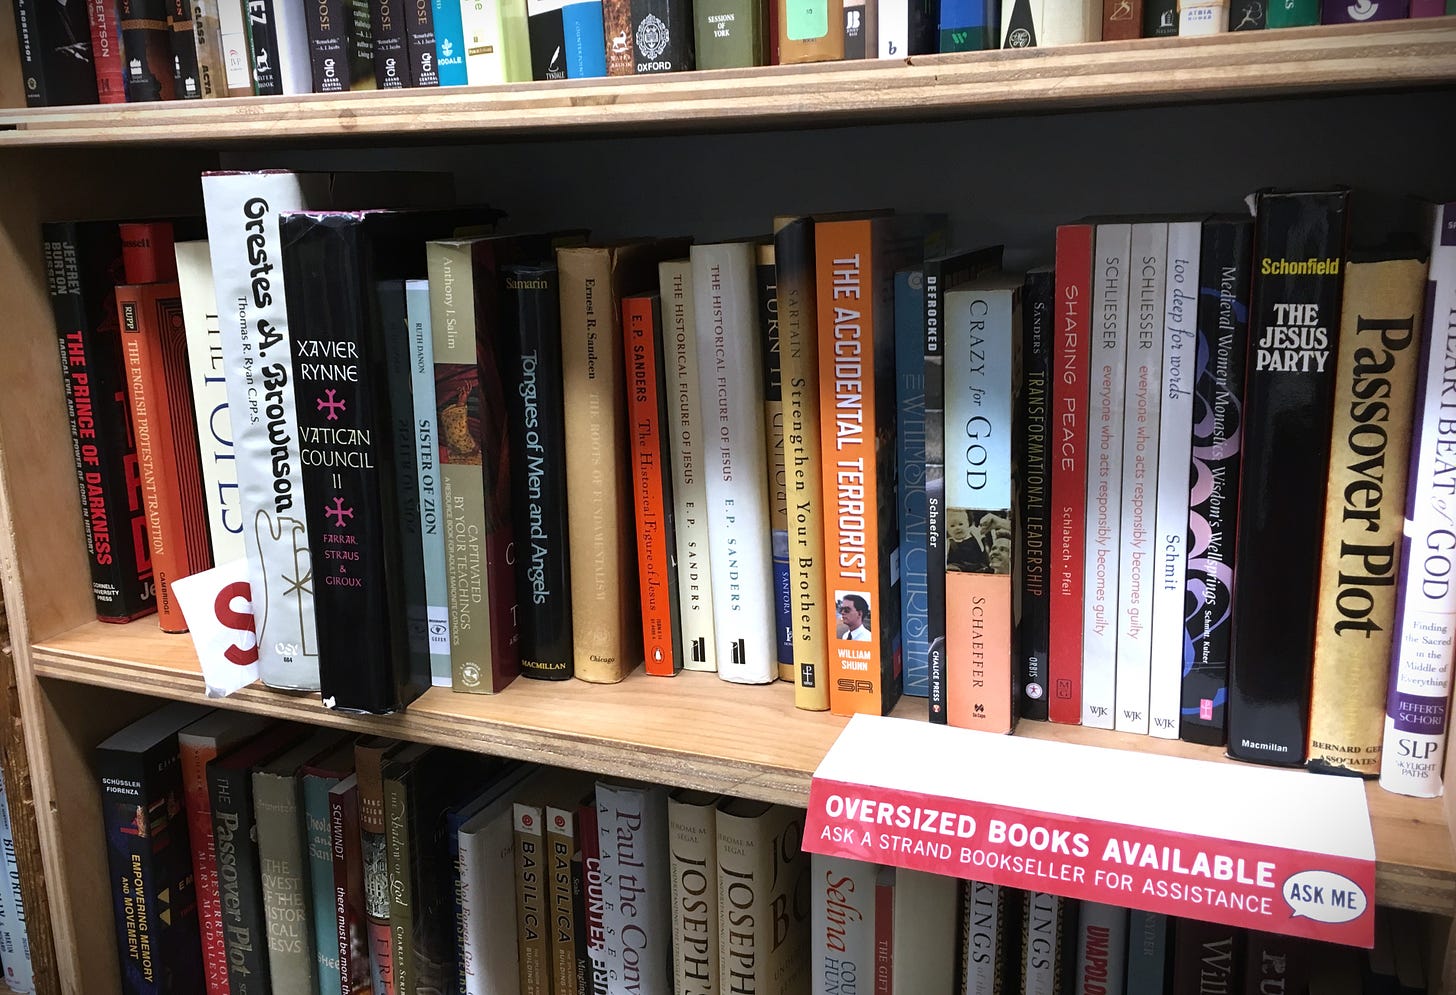 The spine of William Shunn's memoir, The Accidental Terrorist, sits on a crowded bookstore shelf amongst other religion-themed books. A sign on the shelf reads "Oversized Books Available. Ask a Strand bookseller for assistance."